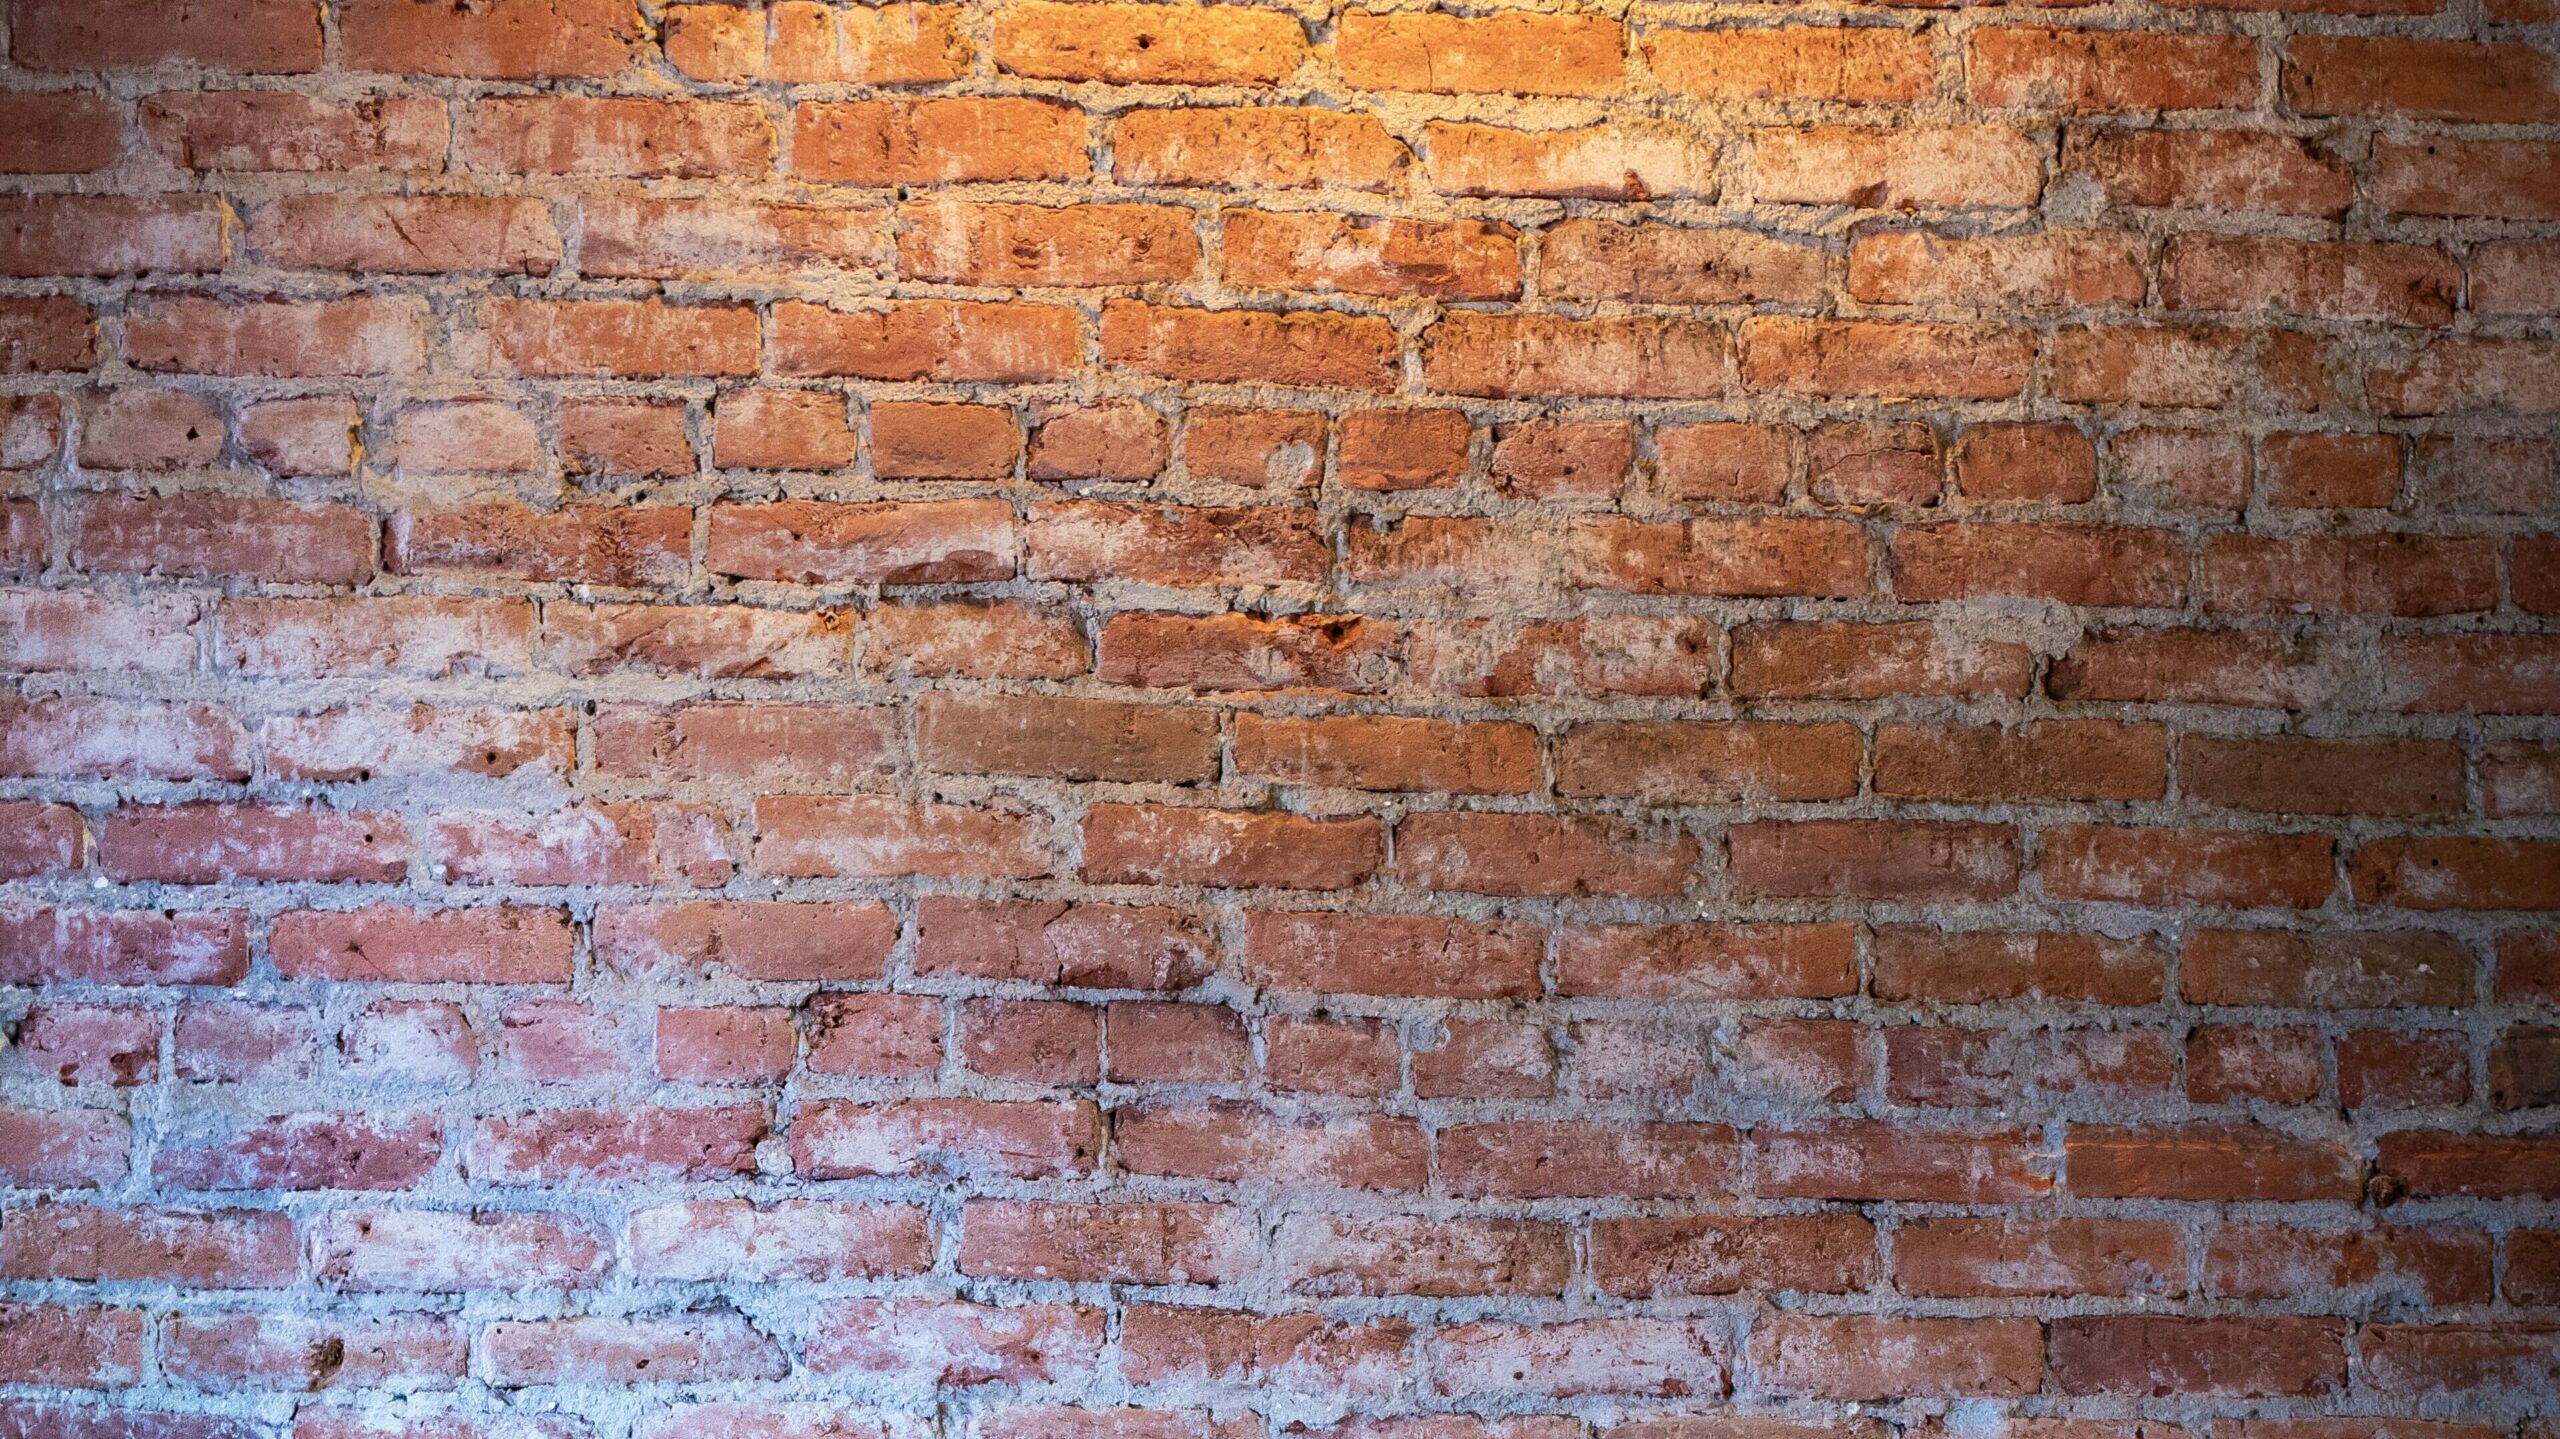 White cast or residue on brick walls